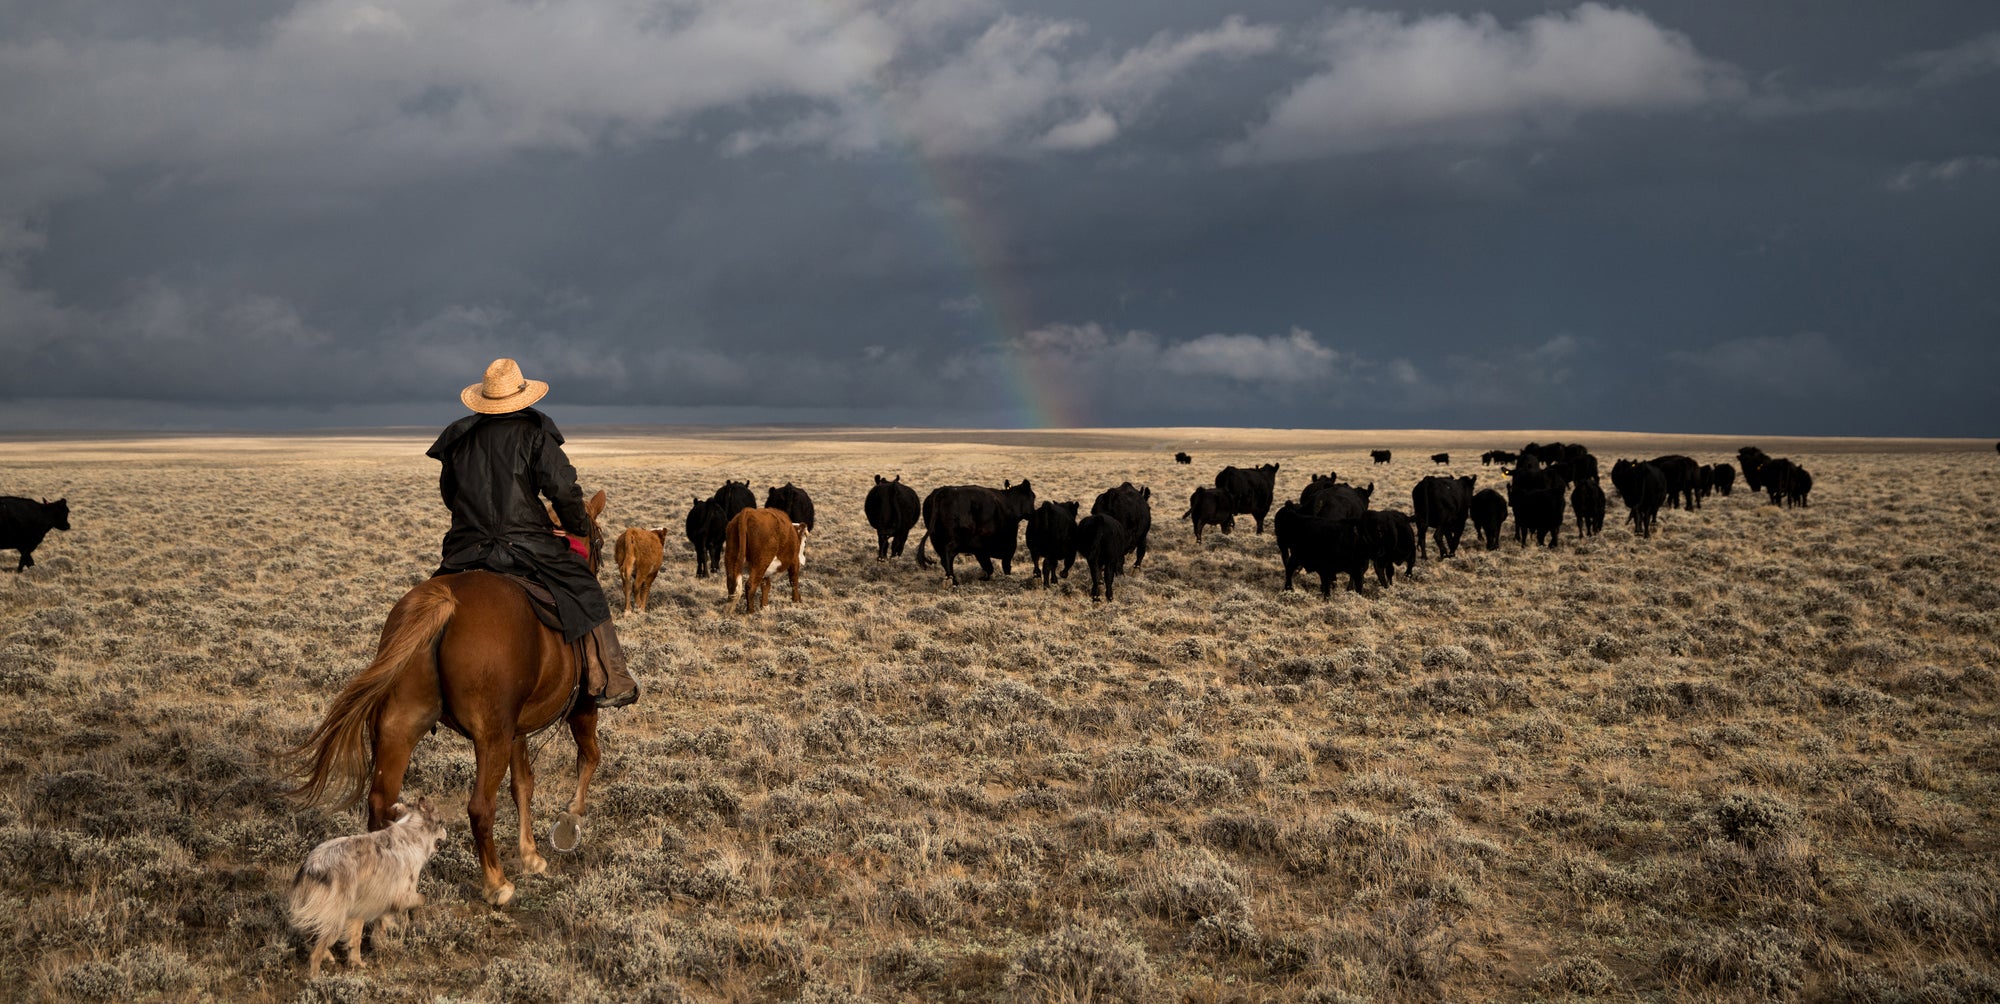 horseback rider moving cattle in open range with overcast sky in background